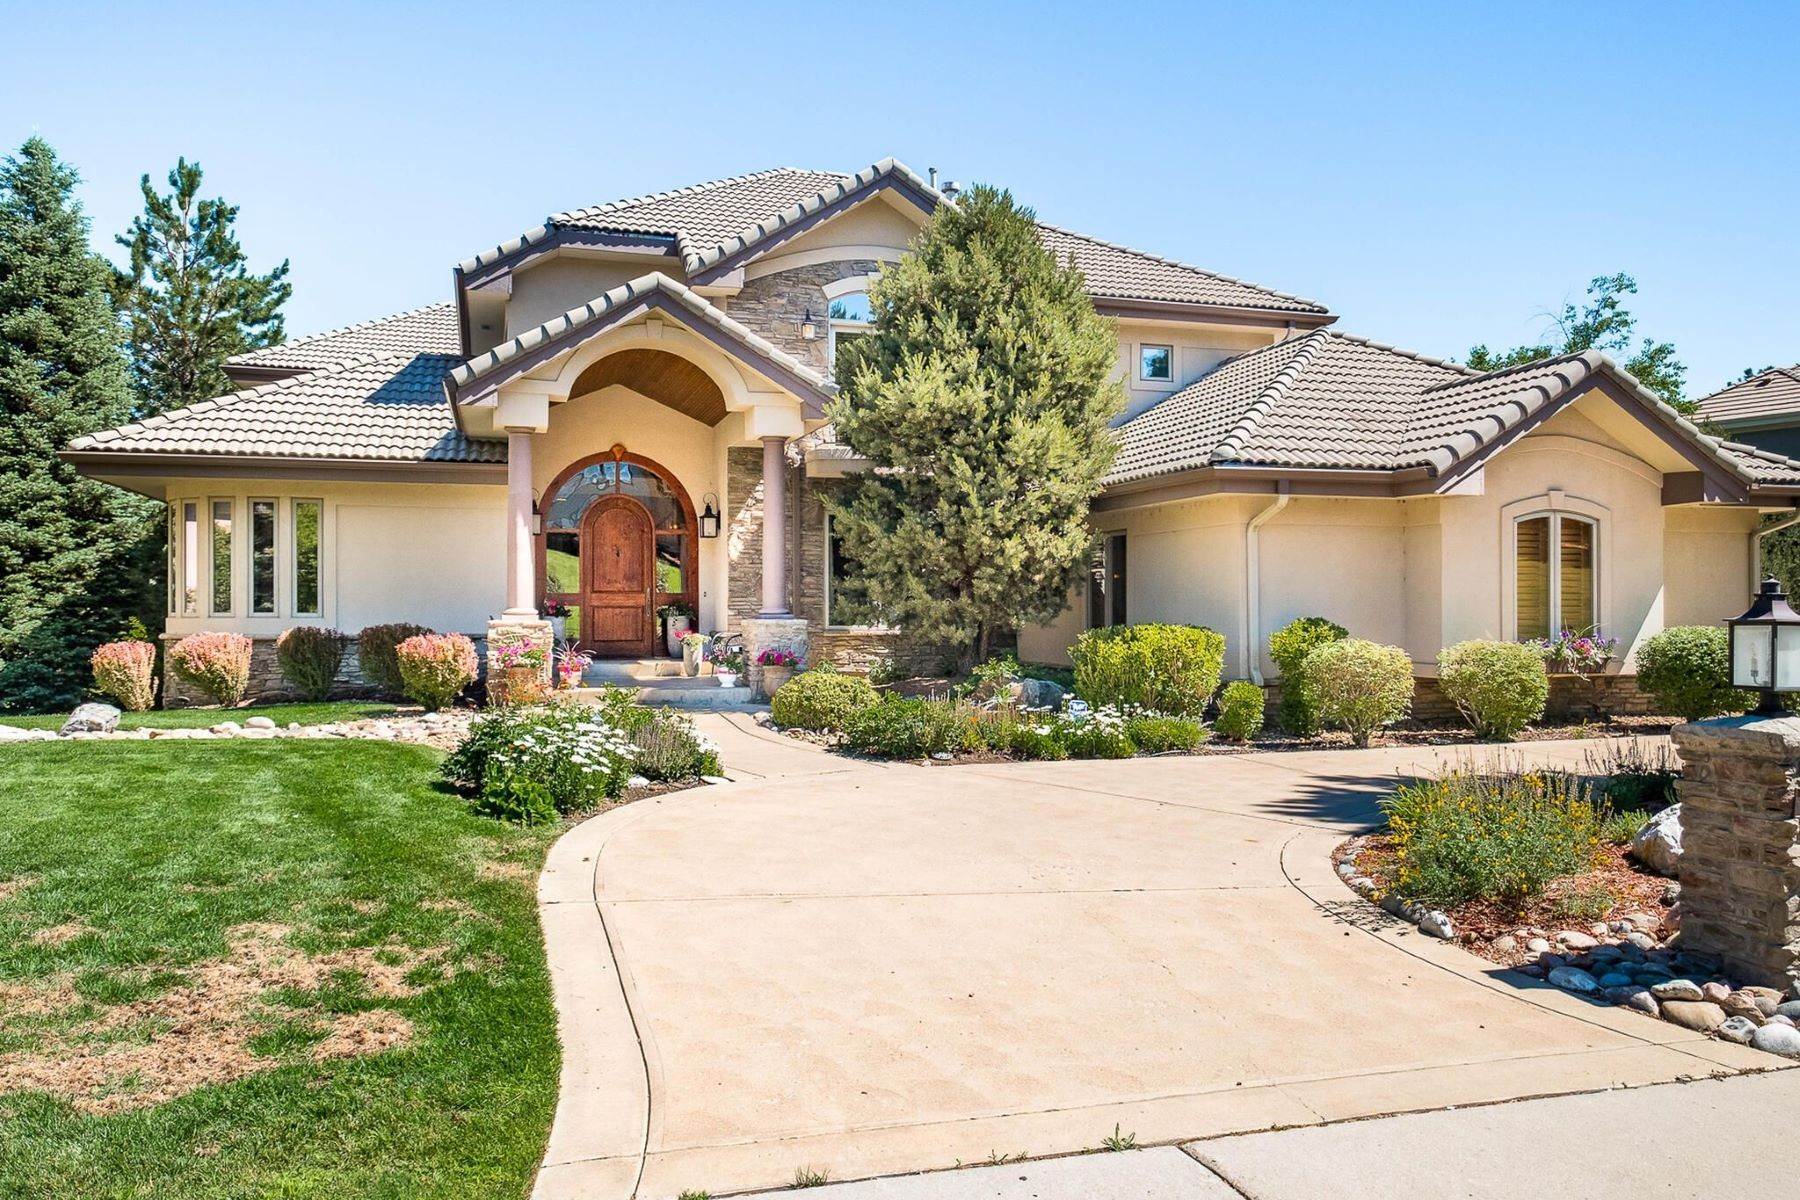 Single Family Homes for Active at Coveted Gated Community 957 Fairchild Drive Highlands Ranch, Colorado 80126 United States